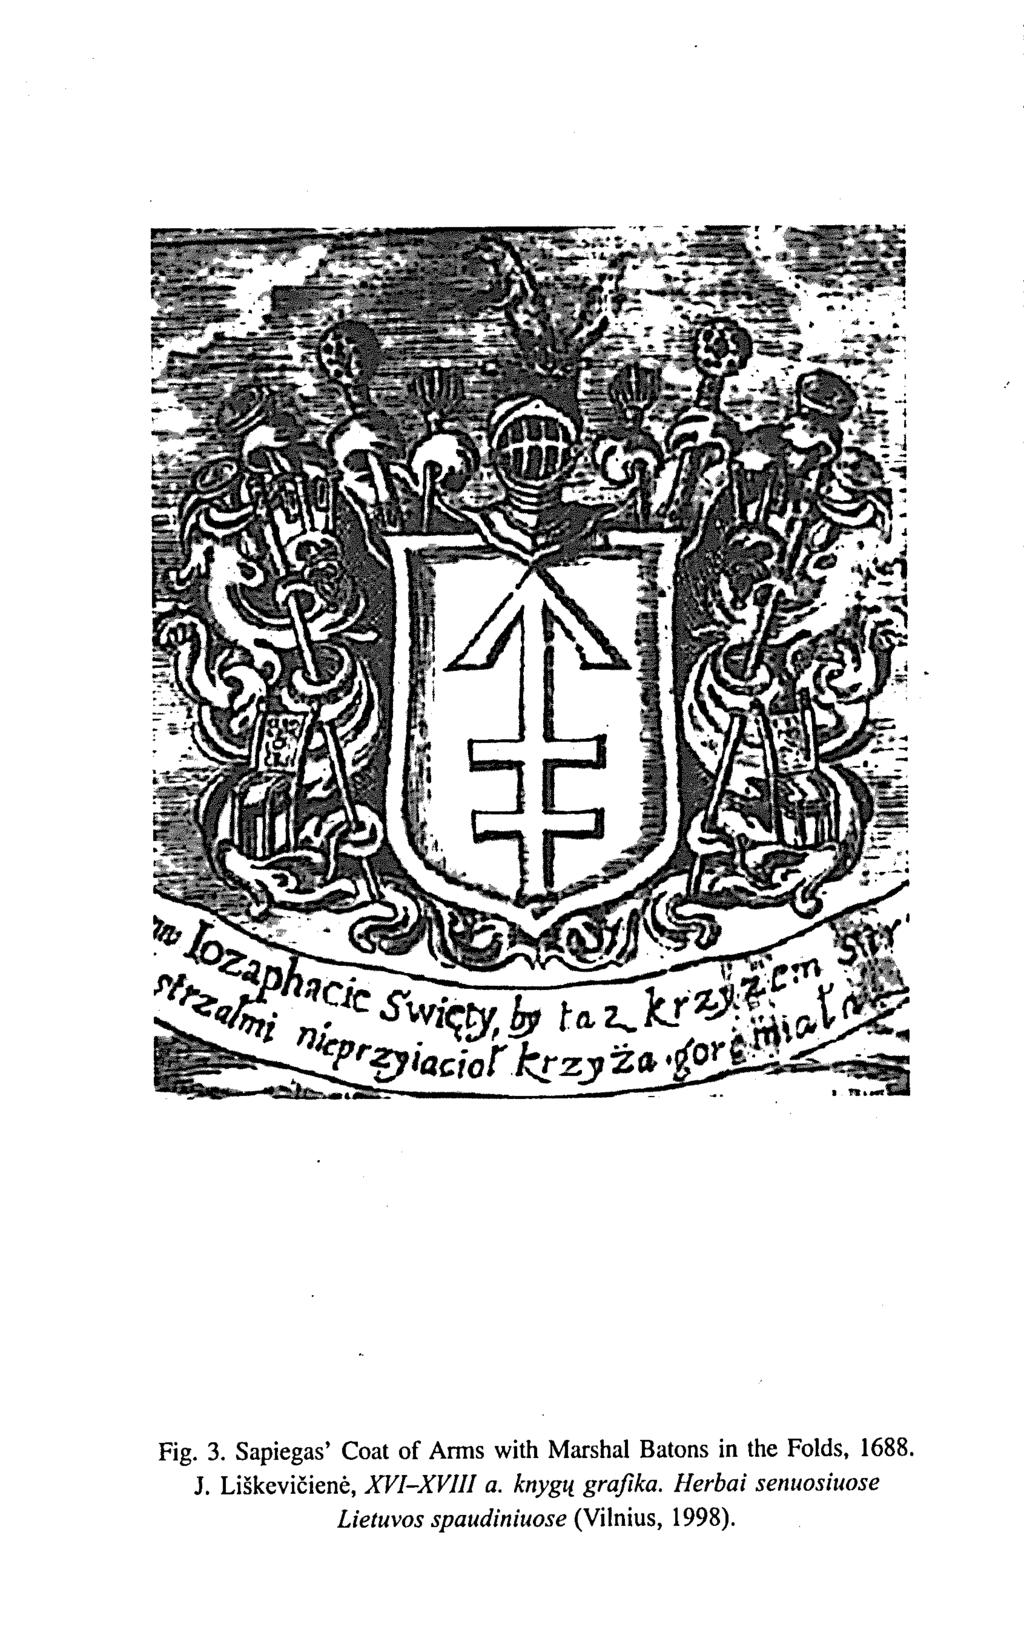 Fig. 3. Sapiegas' Coat of Arms with Marshal Batons in the Folds, 1688. J.